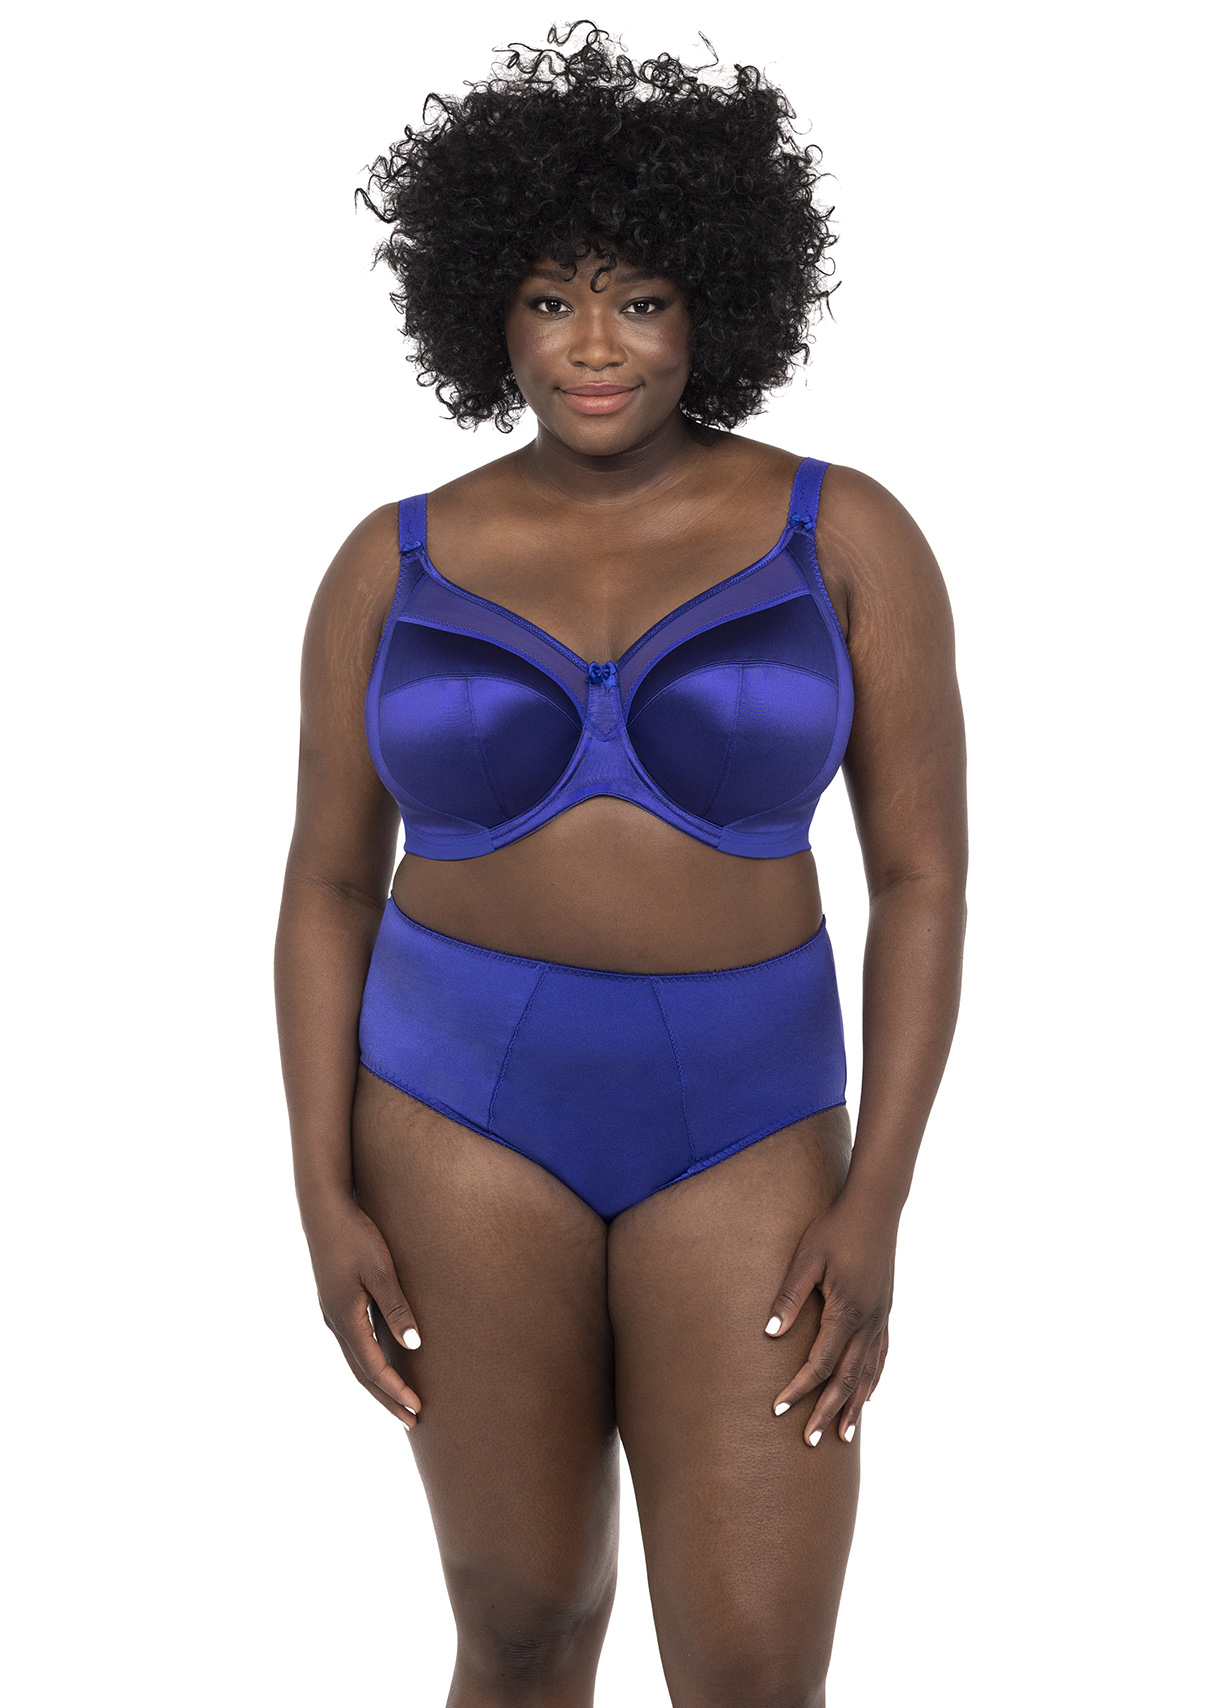 Goddess Keira Brief in Pink Nectar FINAL SALE NORMALLY $22 - Busted Bra Shop